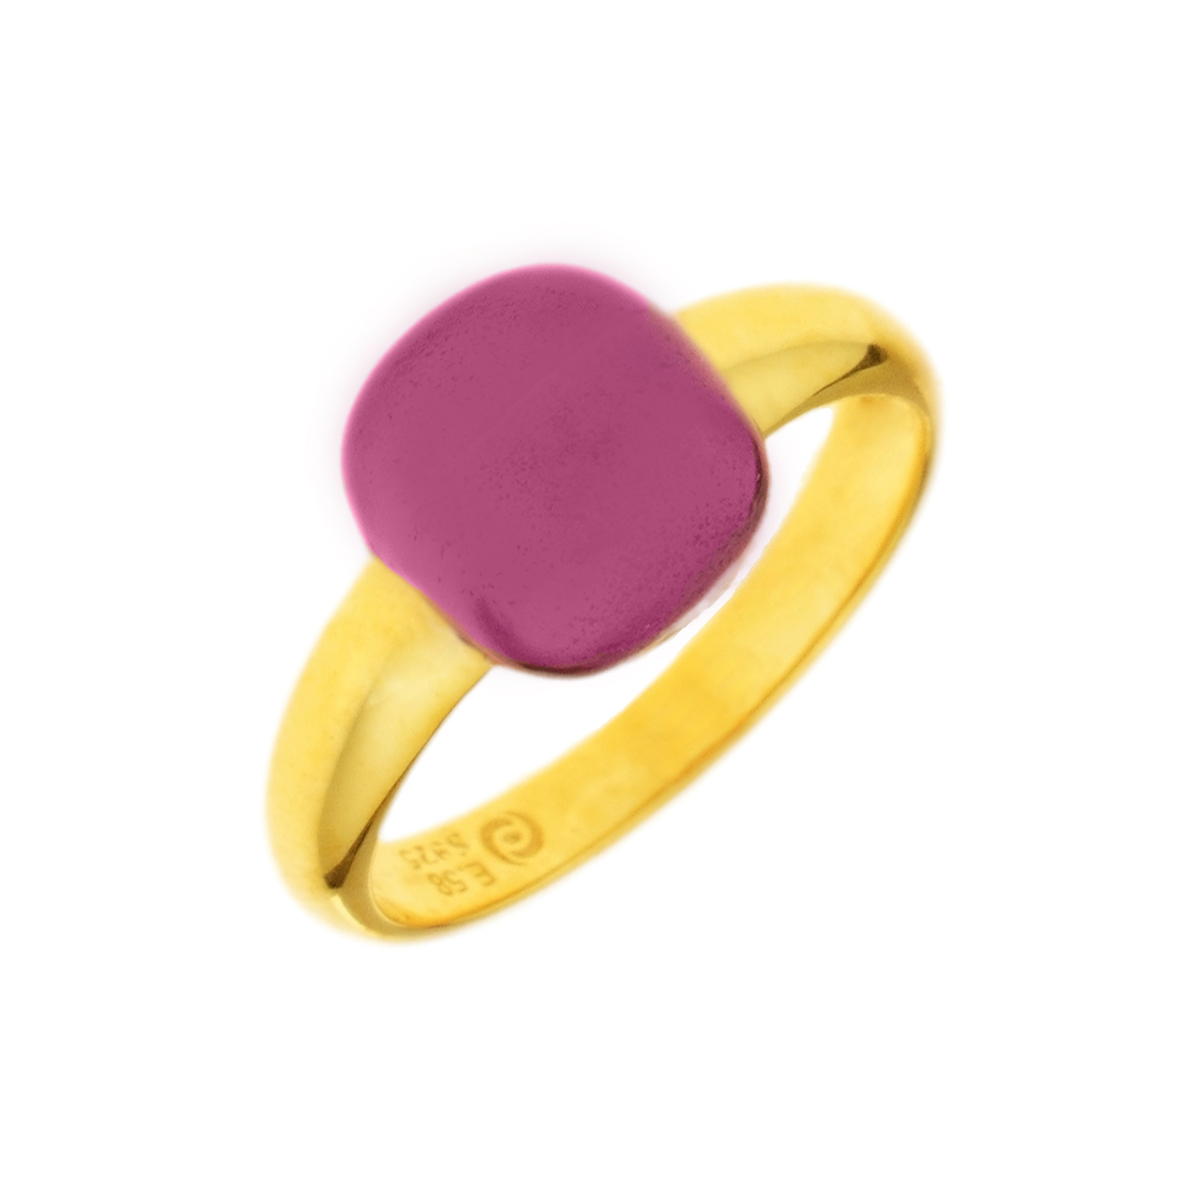 GREGIO Ring with Purple Enamel - Silver 925 and Gold Plated